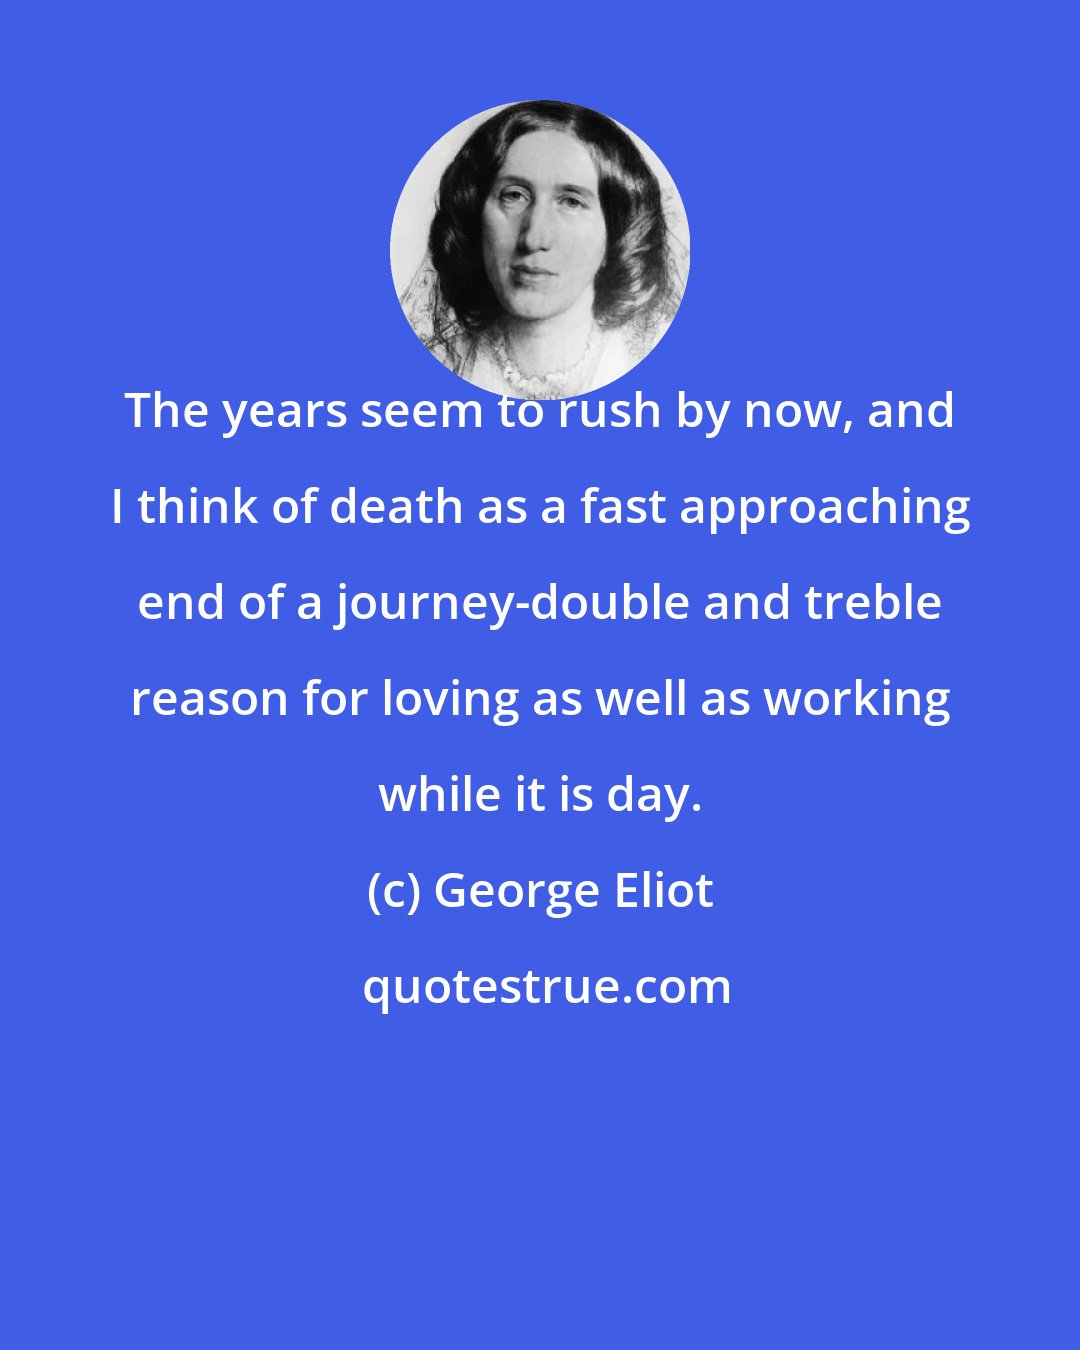 George Eliot: The years seem to rush by now, and I think of death as a fast approaching end of a journey-double and treble reason for loving as well as working while it is day.